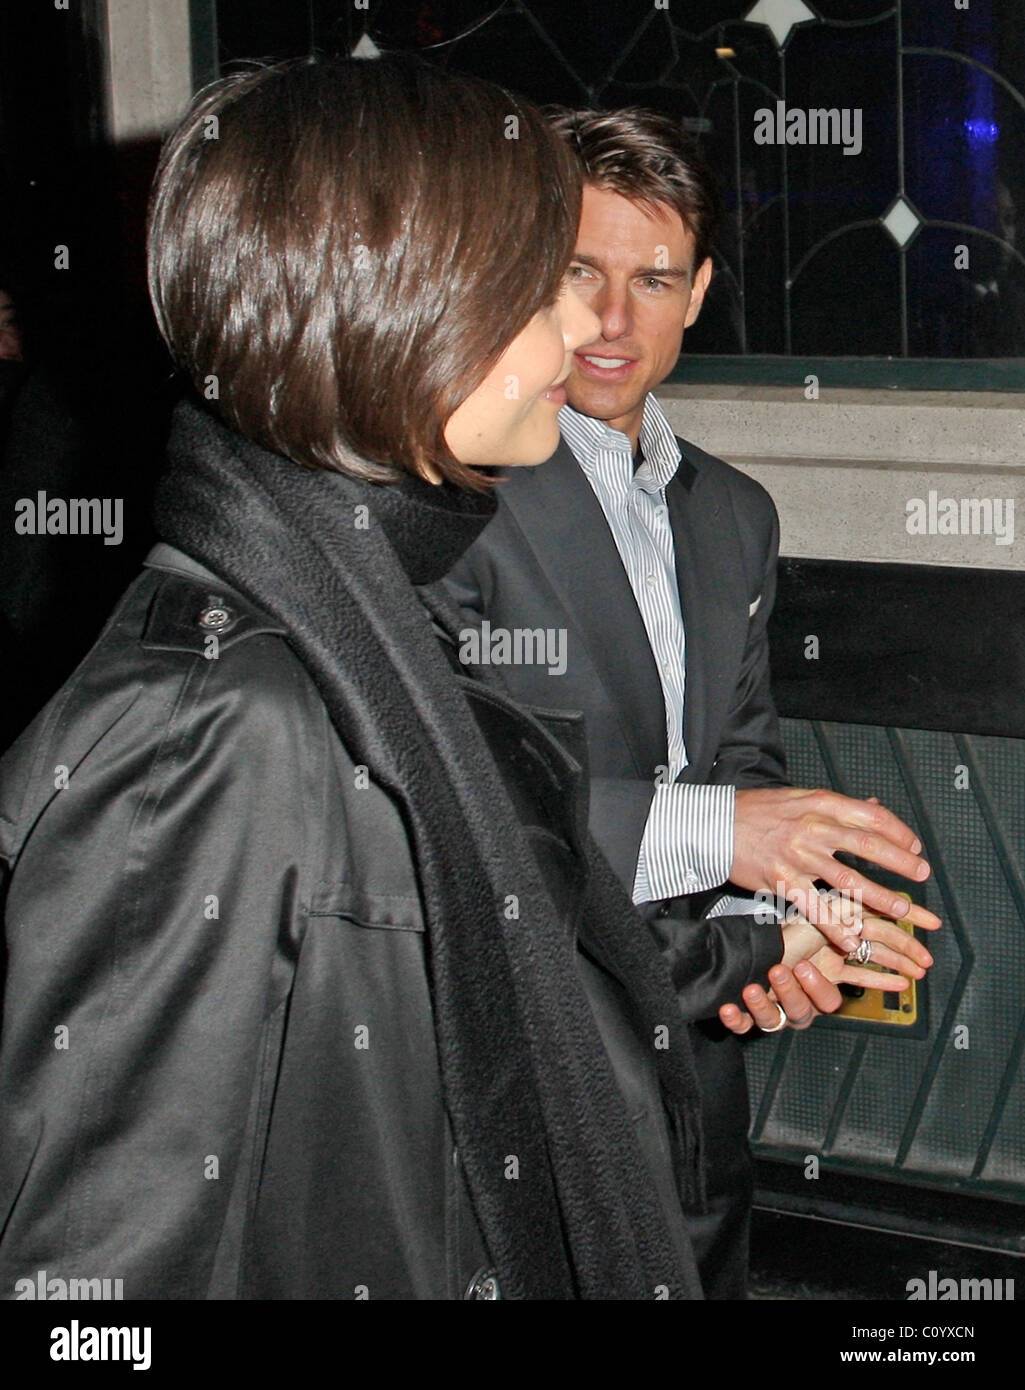 Tom Cruise and his wife Katie Holmes leave The Ivy restaurant, having spent over 2 hours dining inside. The pair smiled and Stock Photo